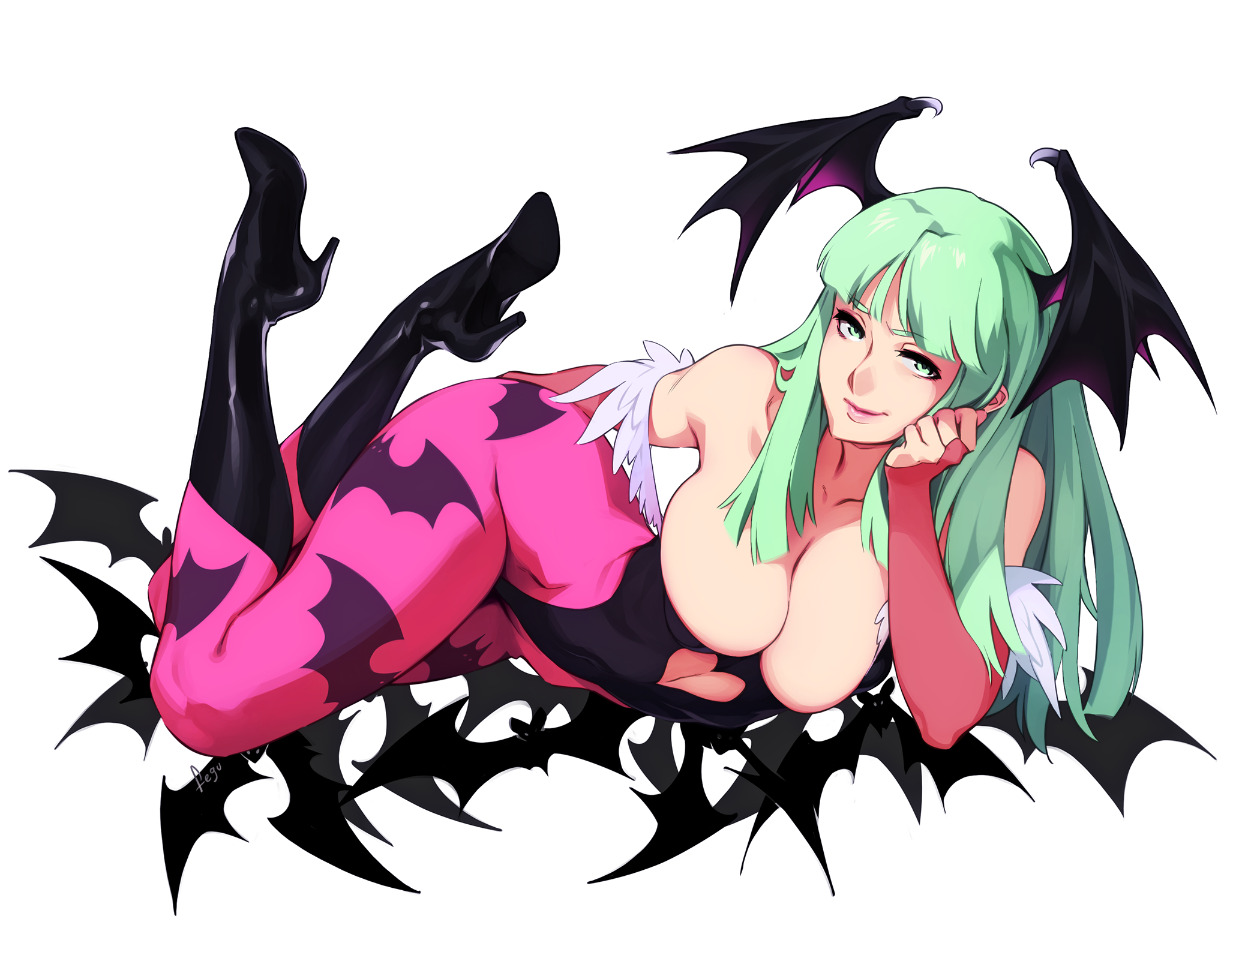 mugis-pie: Once I drew Lilith, I couldn’t go long without doing big-sis too…Here’s